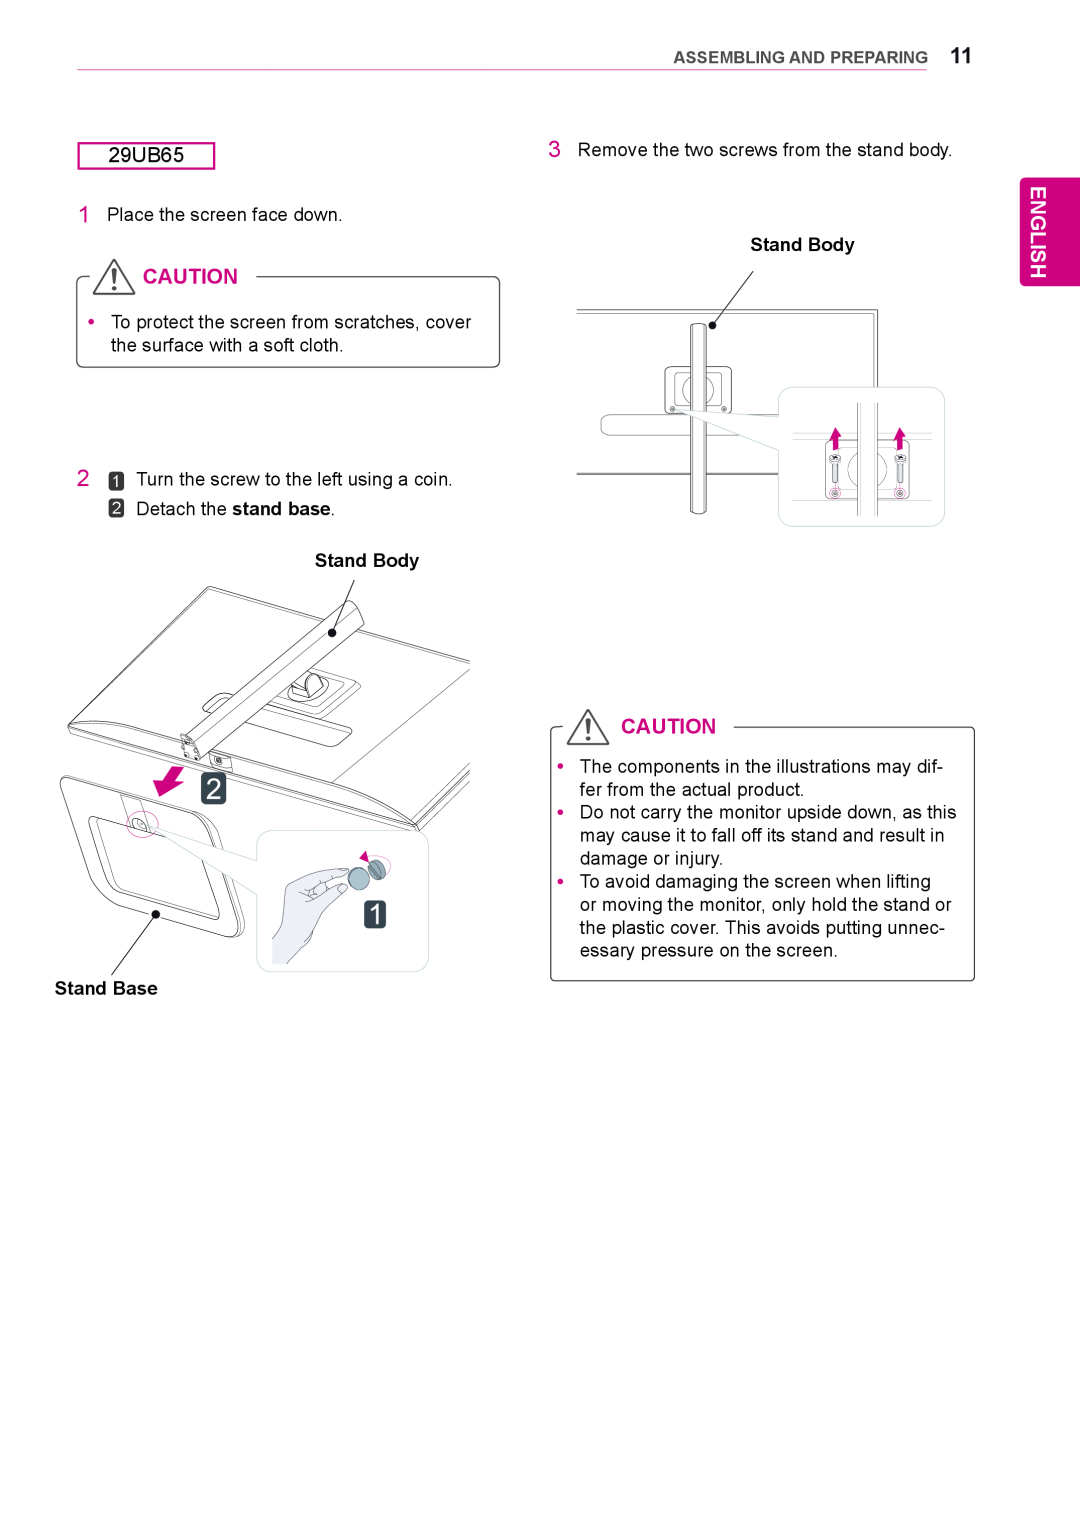 LG Electronics 29UM65, 29UB65 owner manual English, Remove the two screws from the stand body 